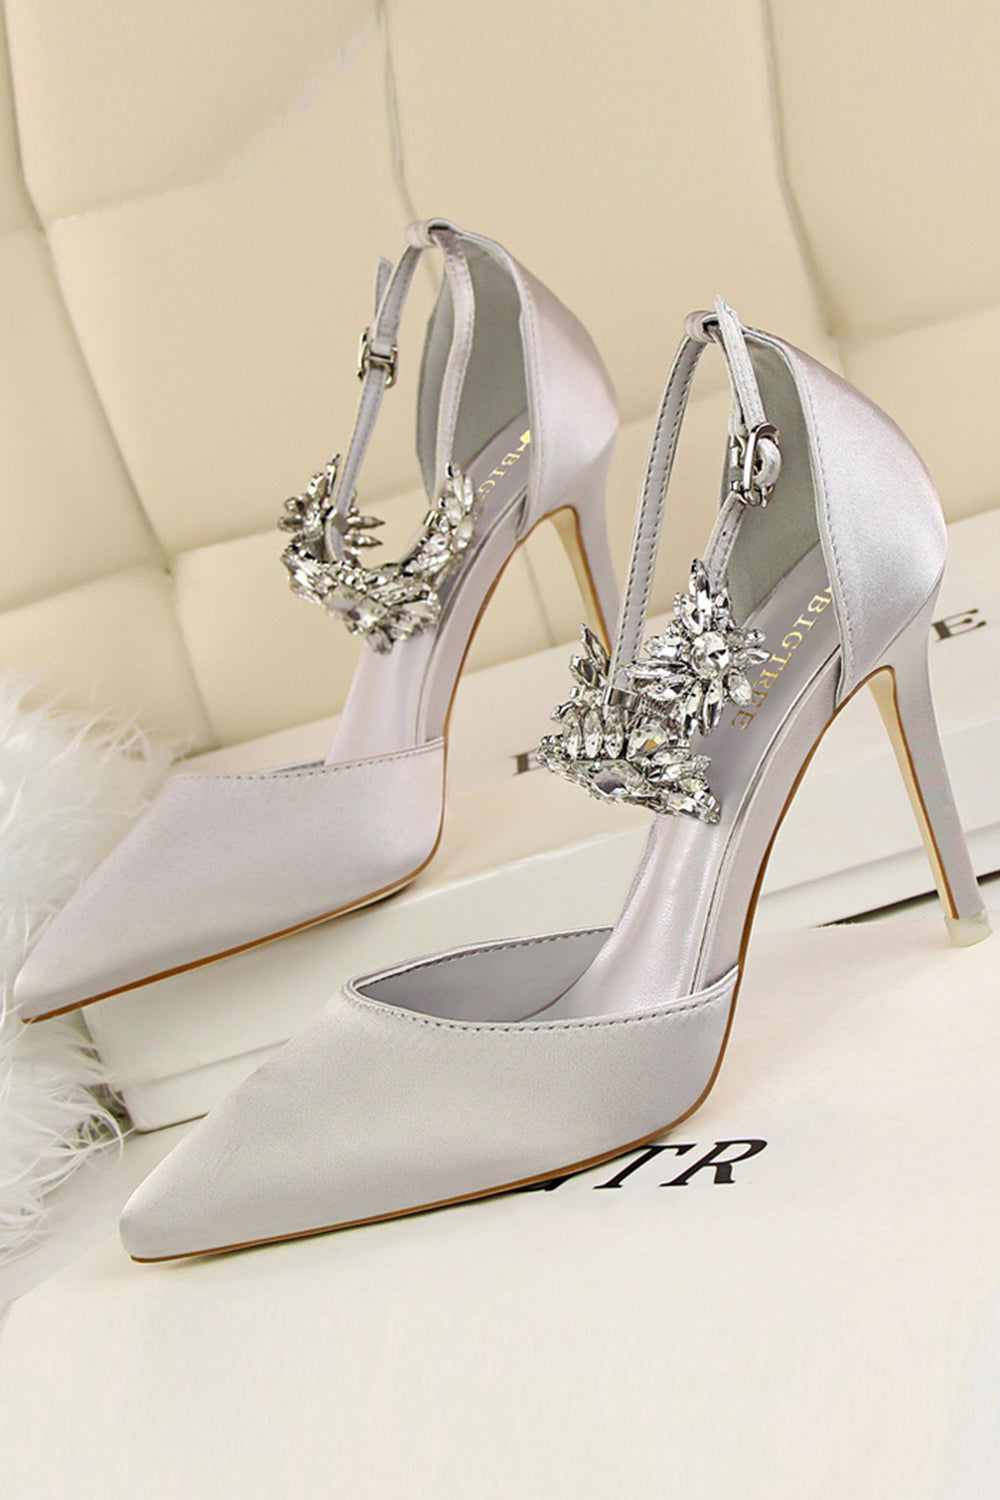 2019 Celebrity Inspired Crystal Wedding Sandals With Peep Toe, Strappy High  Heels, 11cm Heel Gold, Silver, Green Prom Jeffrey Campbell Shoes From  Uniquebridalboutique, $52.97 | DHgate.Com